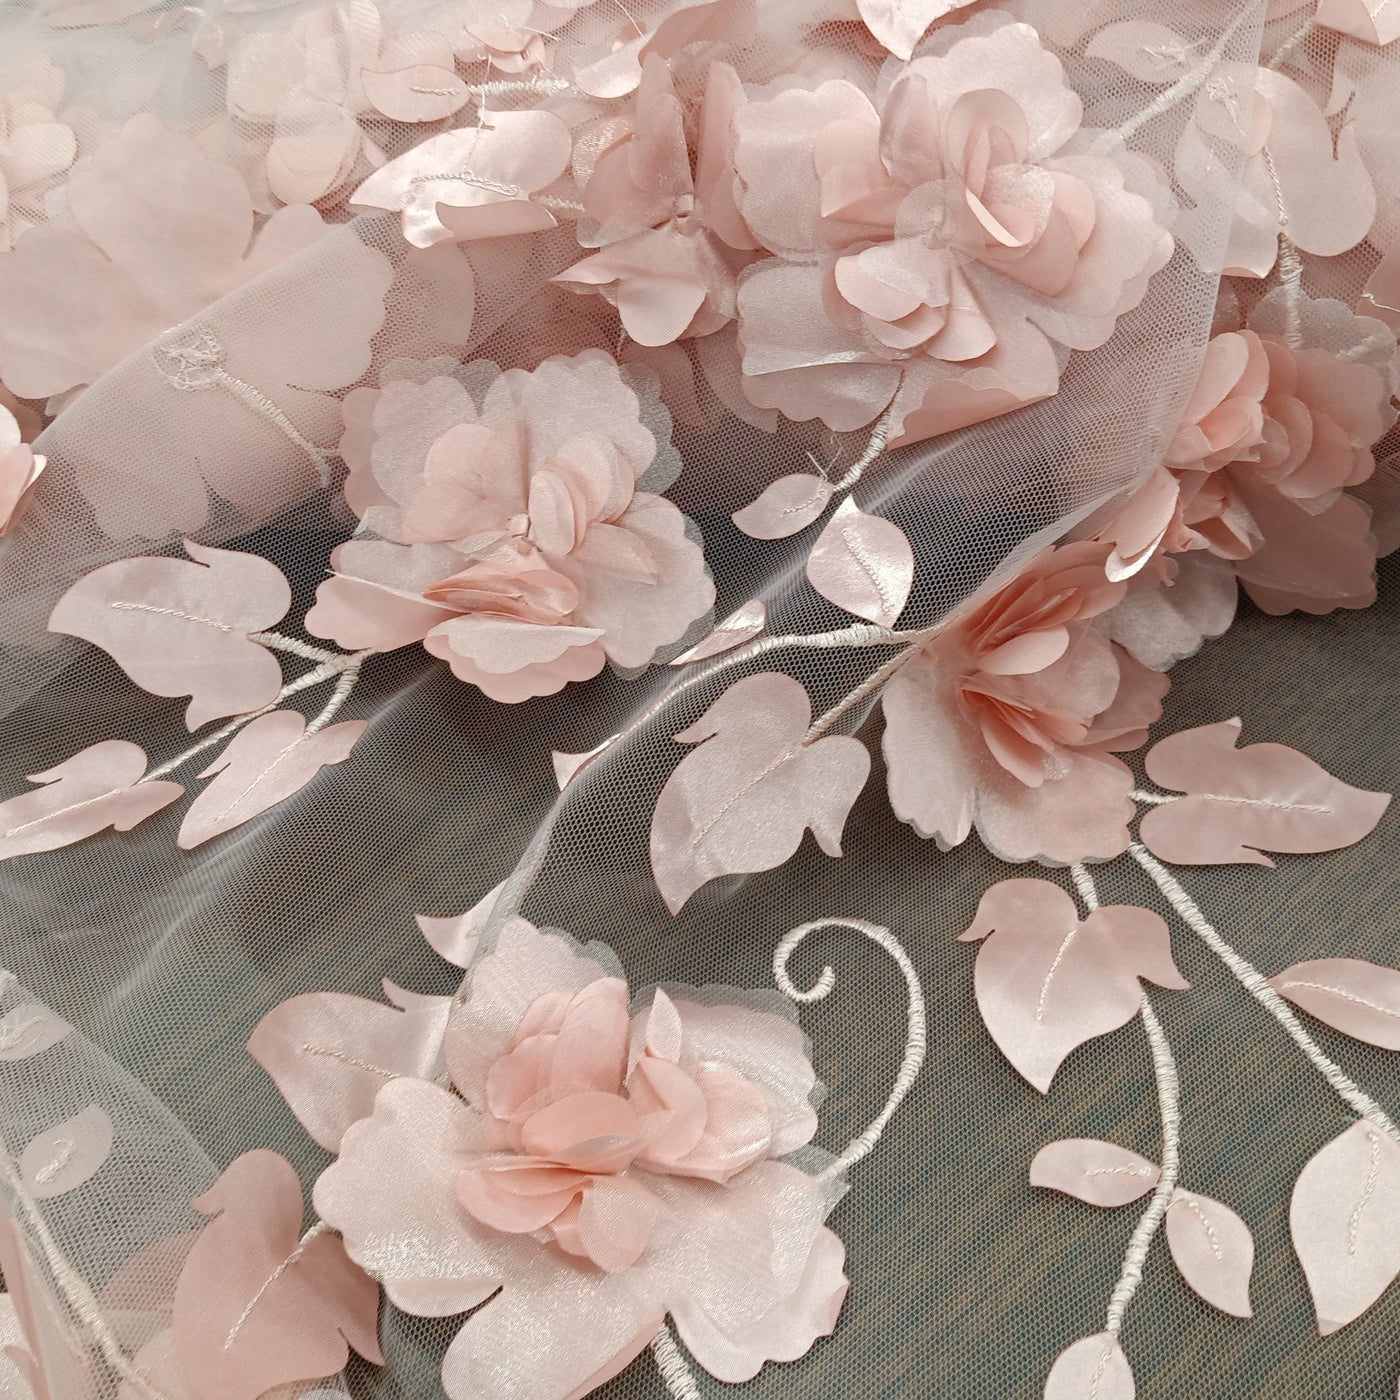 Delicate 3D Flowers Scattered on Embroidered Blush Soft Tulle Net Fabric. Perfect Wedding Lace for Bridal Dresses or Quinceanera Dresses 54" Wide. Sold by the Yard. Lace Usa